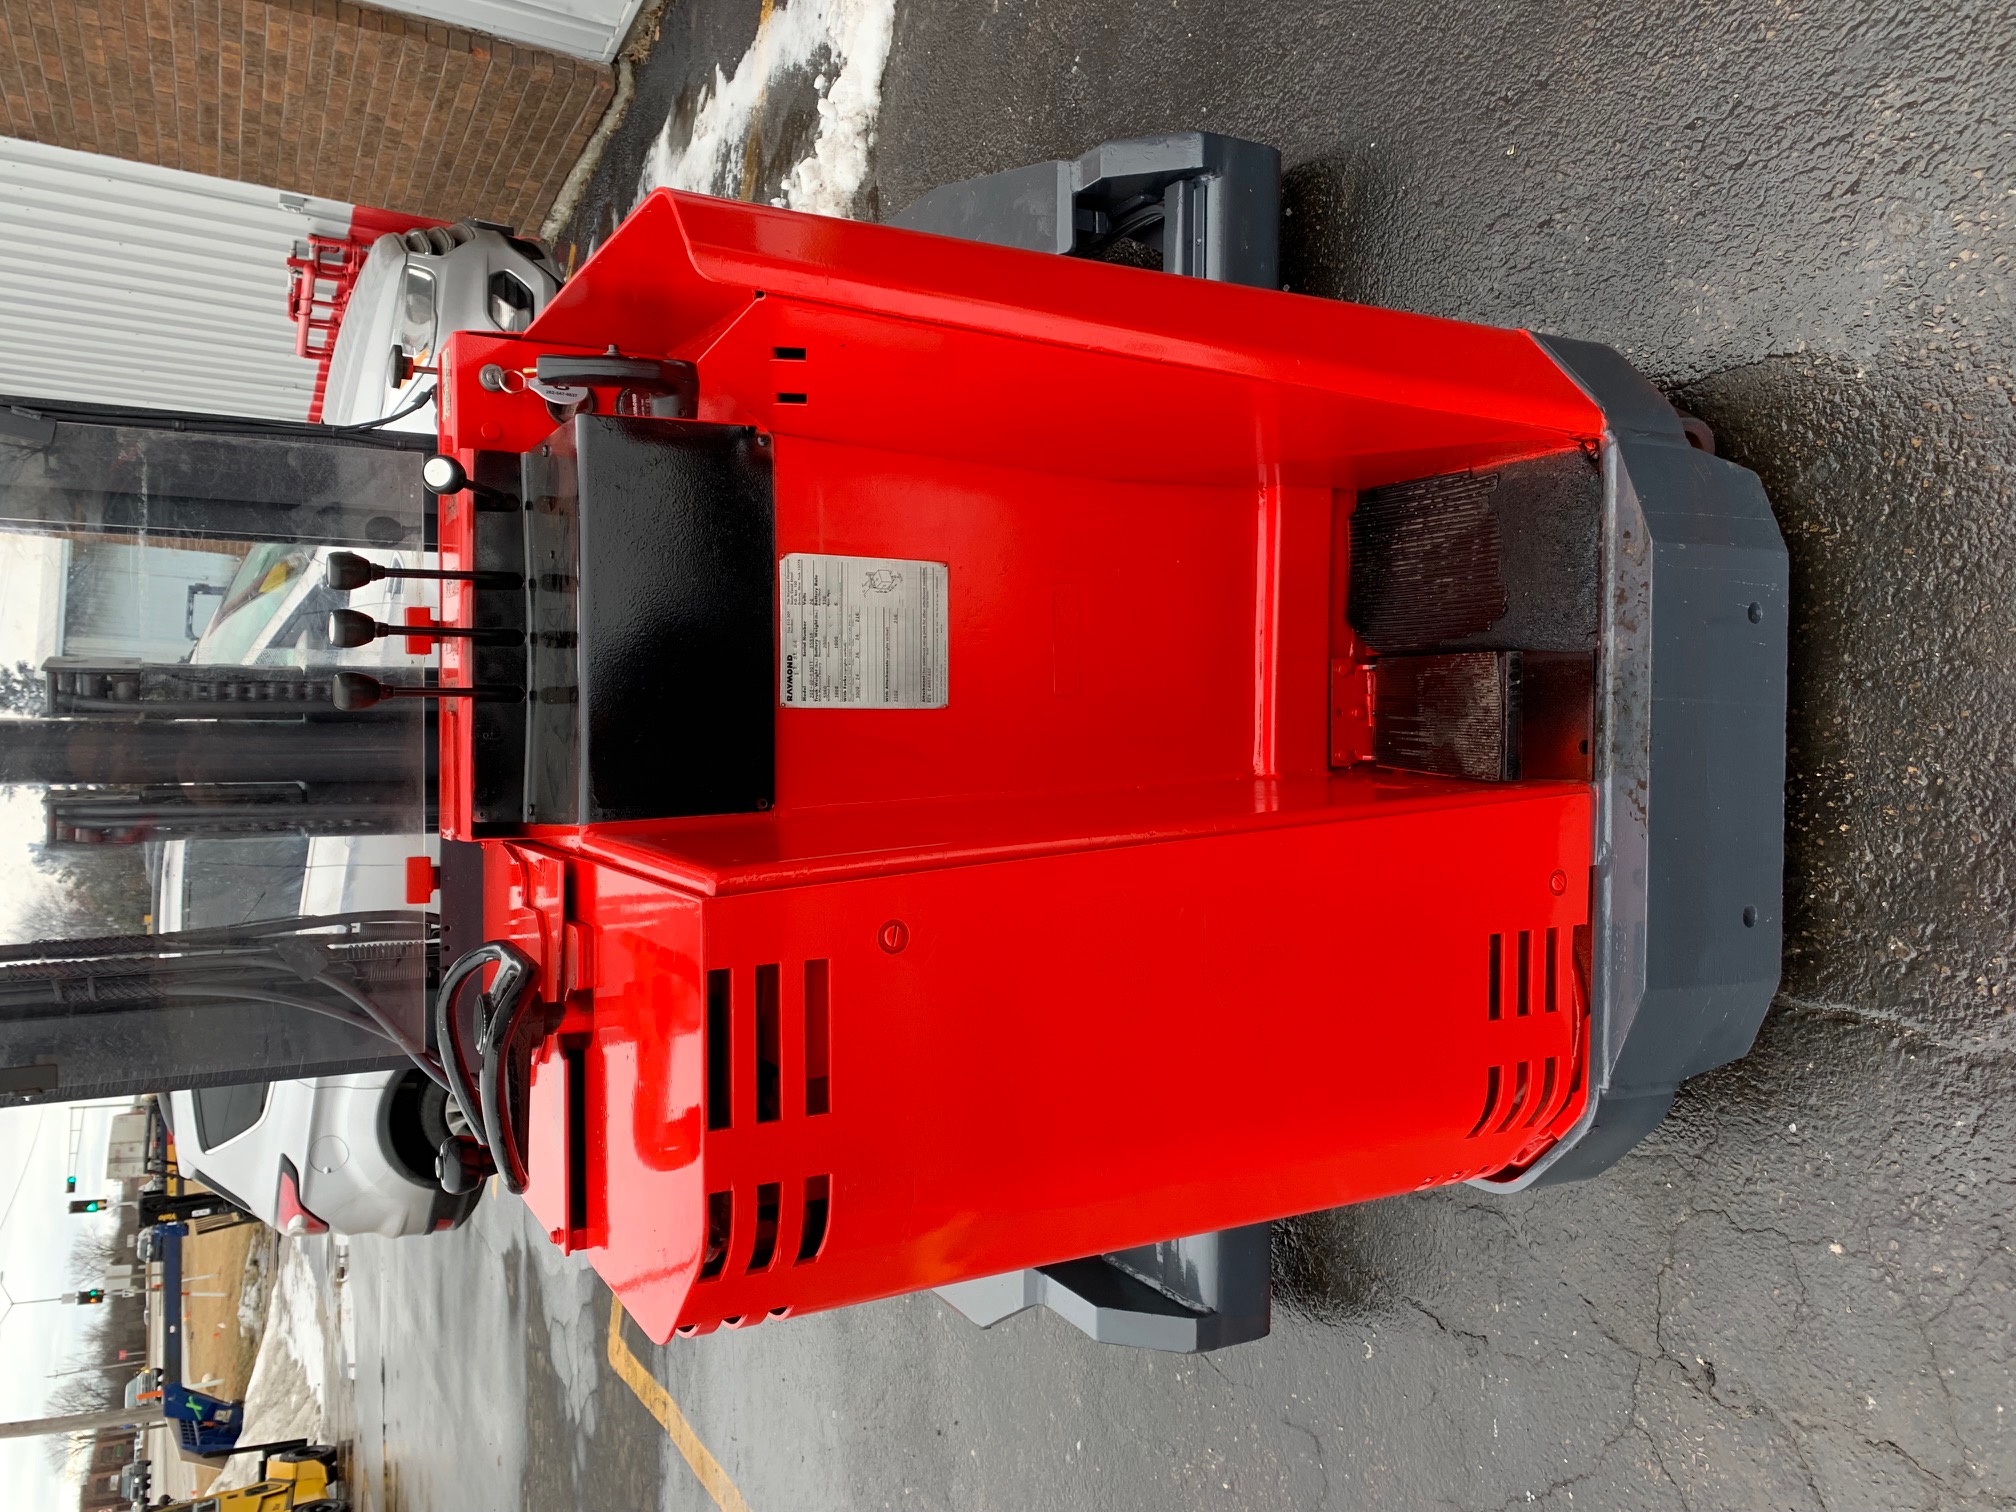 216" lift height red raymond reach truck for sale